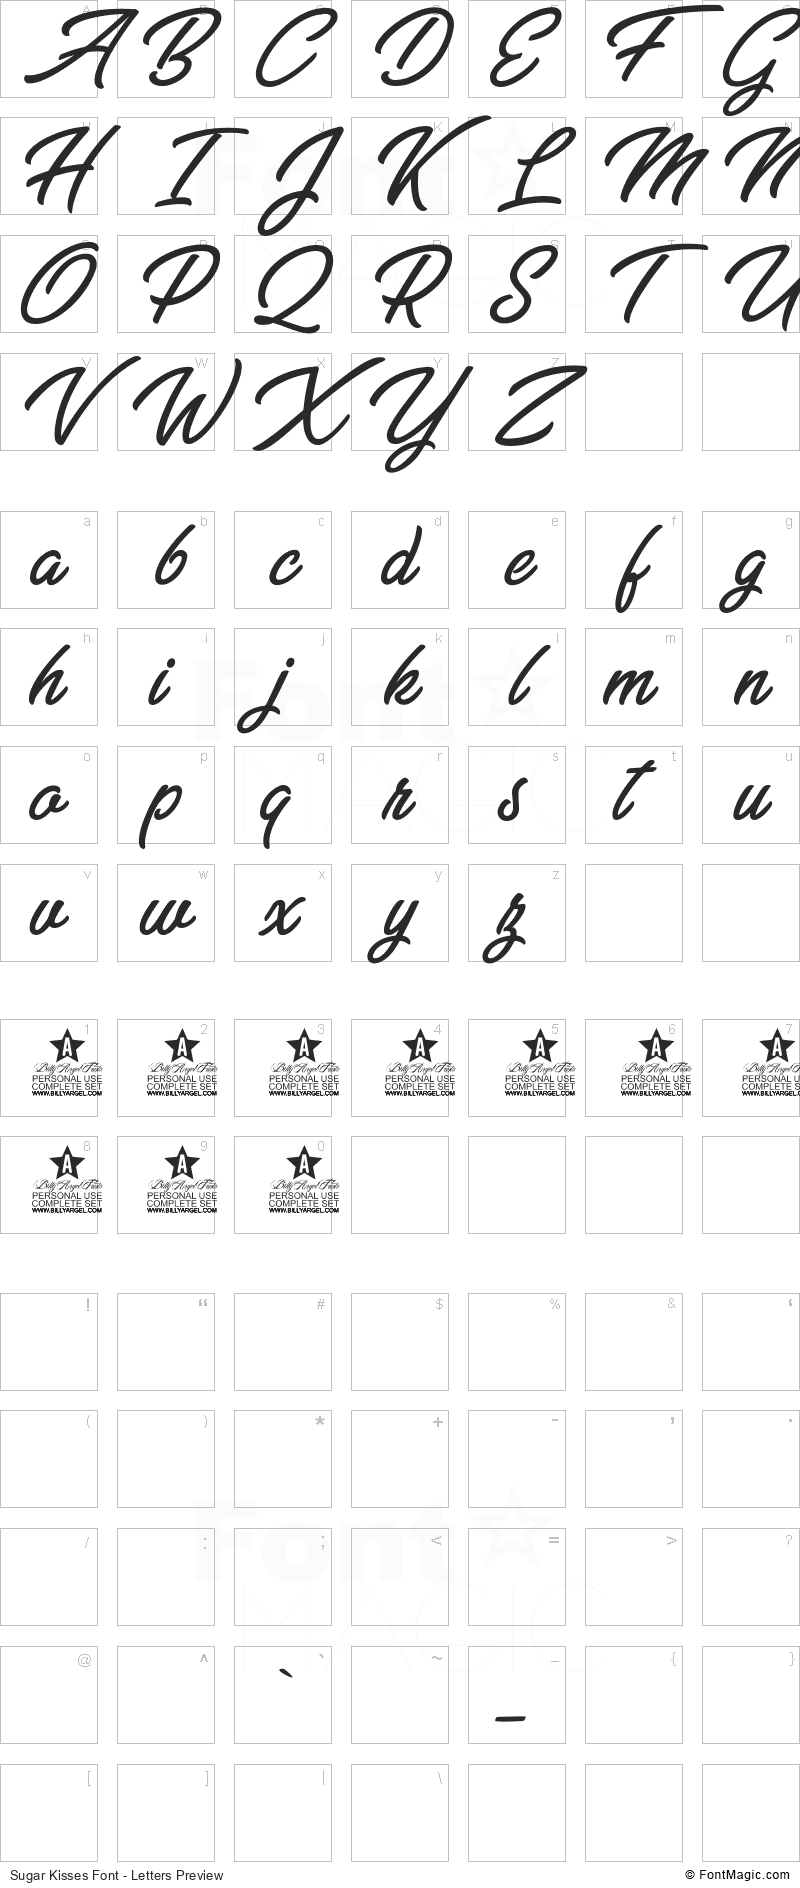 Sugar Kisses Font - All Latters Preview Chart